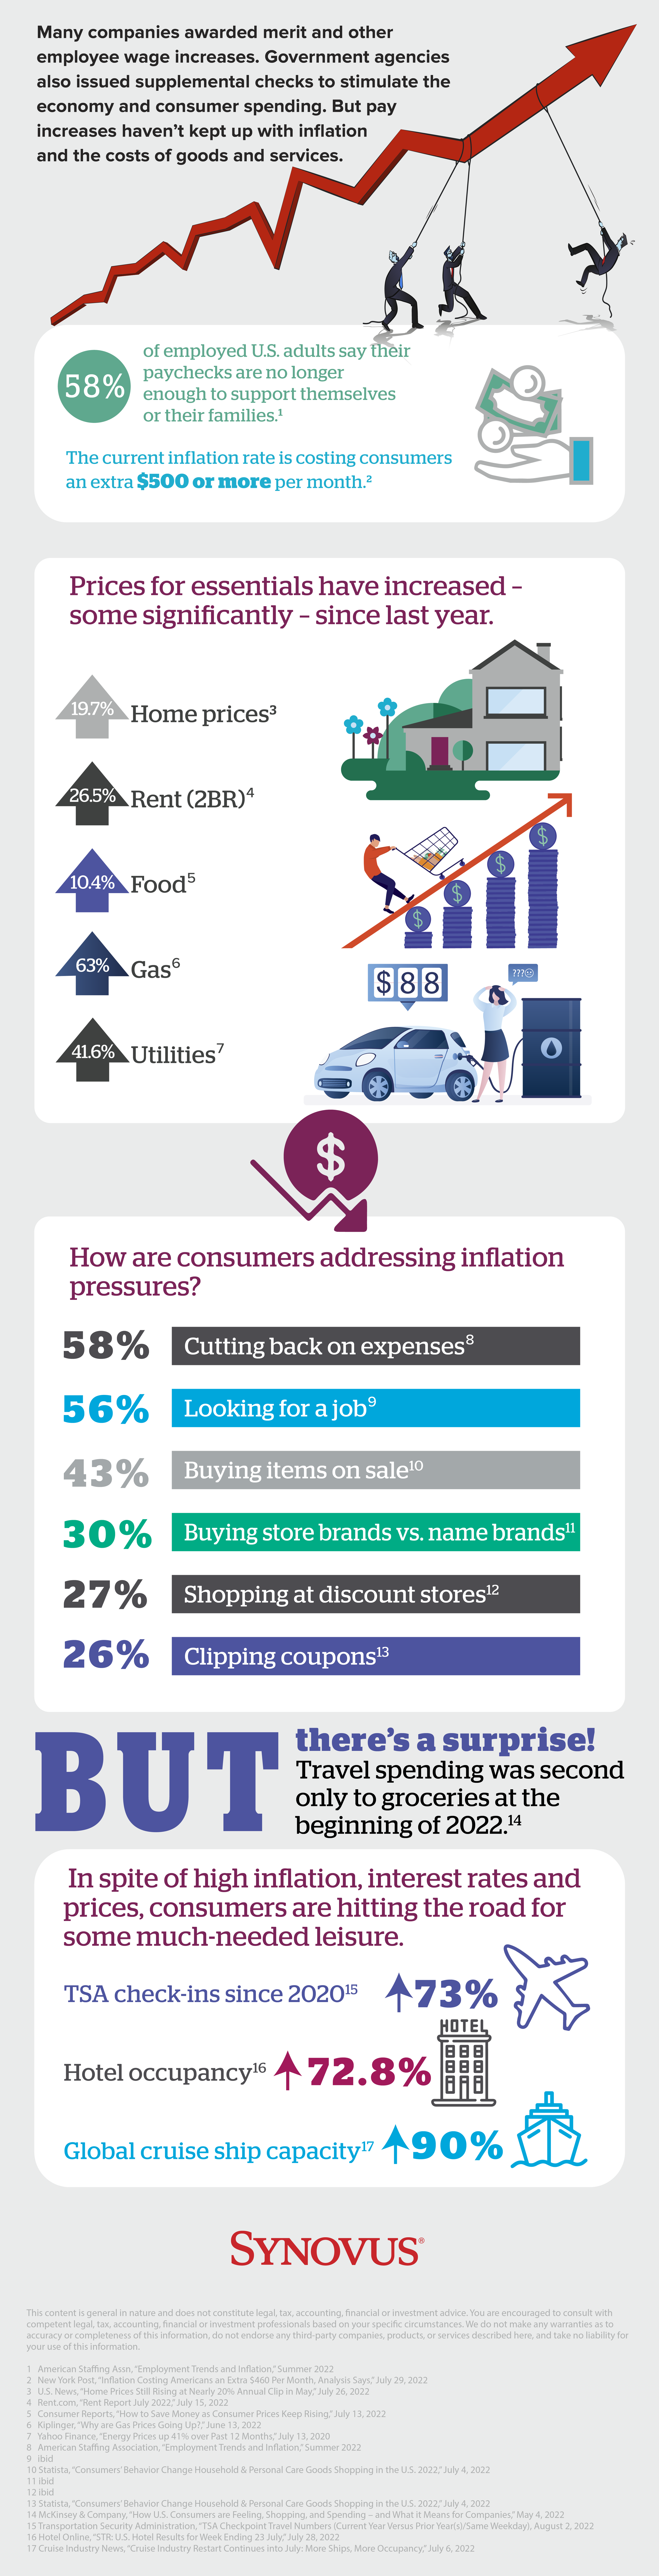 Infographic describing consumer spending under inflation pressure. A full description is available through a link beneath the image.